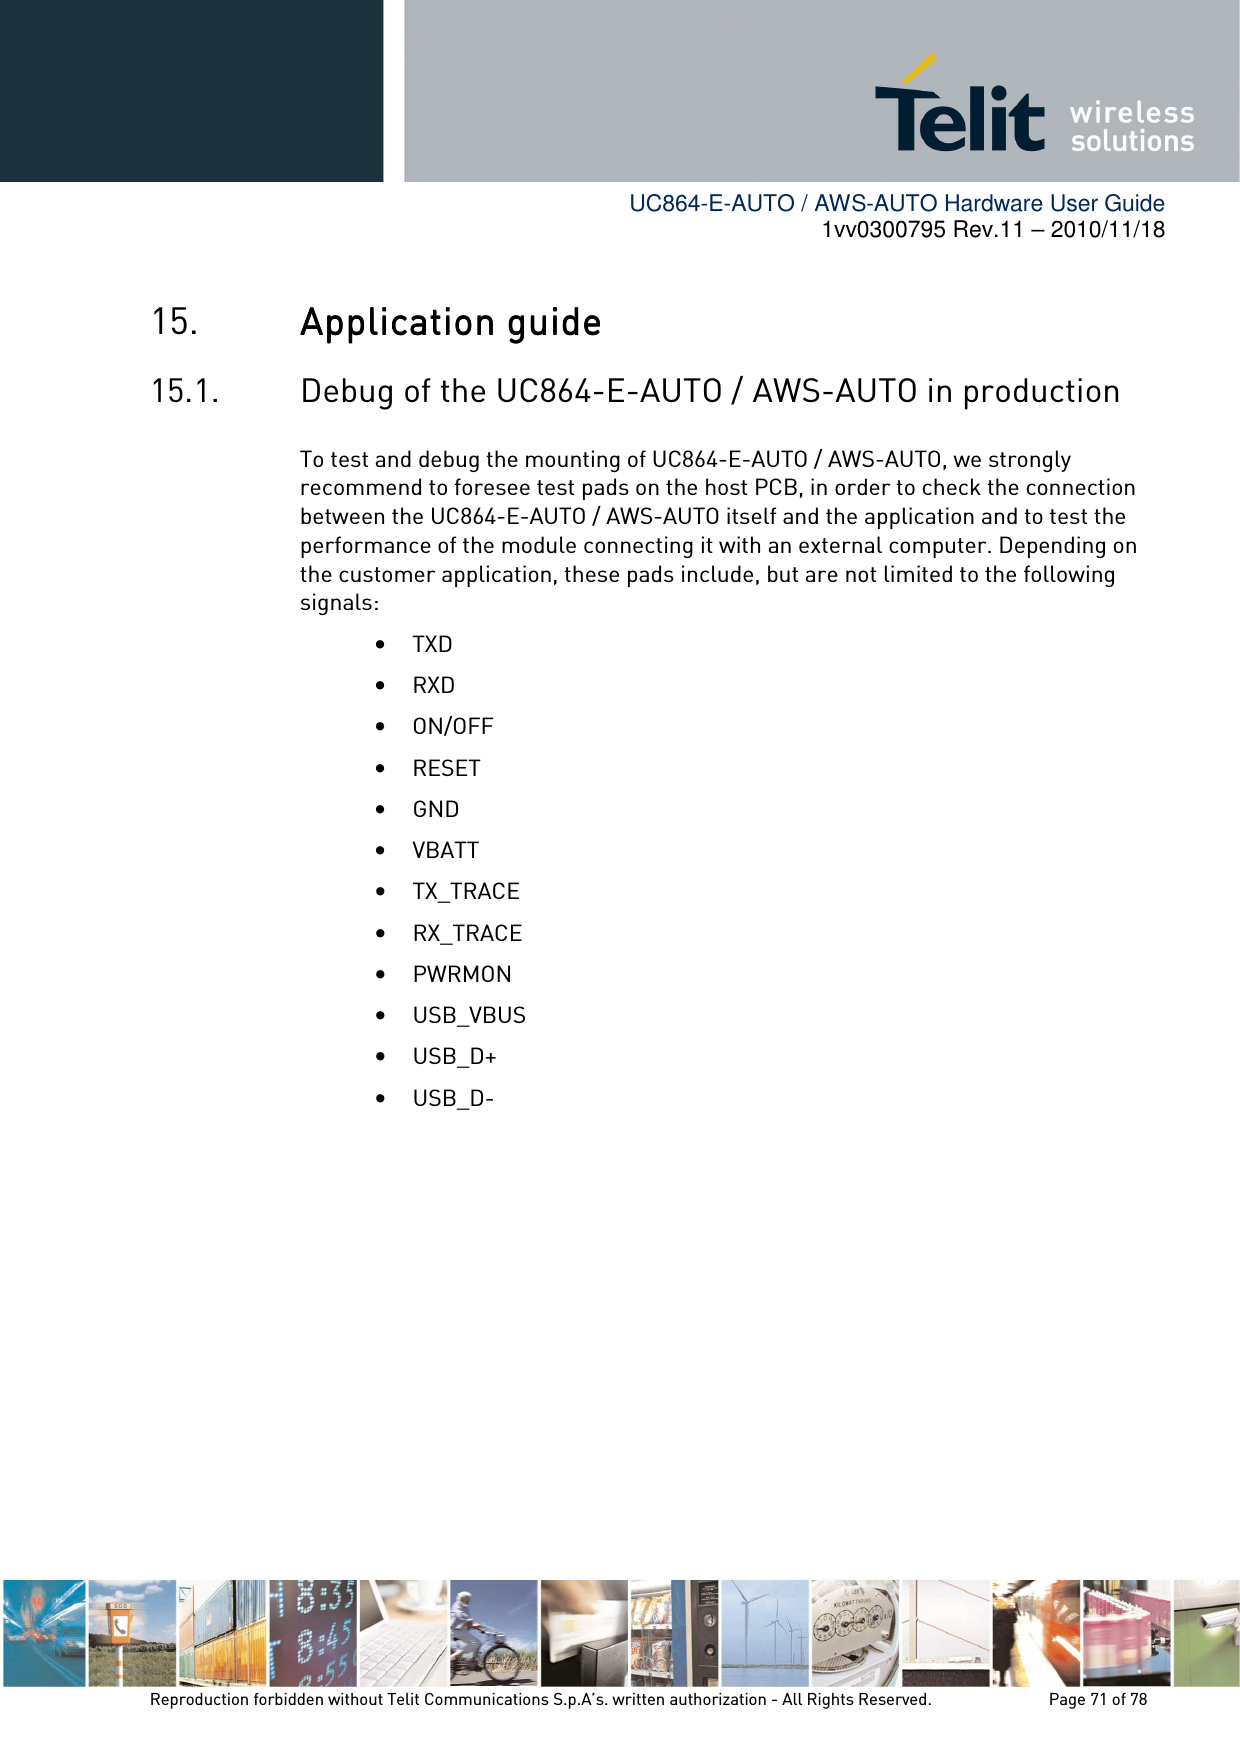        UC864-E-AUTO / AWS-AUTO Hardware User Guide 1vv0300795 Rev.11 – 2010/11/18     Reproduction forbidden without Telit Communications S.p.A’s. written authorization - All Rights Reserved.    Page 71 of 78  15. Application guideApplication guideApplication guideApplication guide    15.1. Debug of the UC864-E-AUTO /    AWS-AUTO in production To test and debug the mounting of UC864-E-AUTO / AWS-AUTO, we strongly recommend to foresee test pads on the host PCB, in order to check the connection between the UC864-E-AUTO / AWS-AUTO itself and the application and to test the performance of the module connecting it with an external computer. Depending on the customer application, these pads include, but are not limited to the following signals: • TXD • RXD • ON/OFF • RESET • GND • VBATT • TX_TRACE • RX_TRACE • PWRMON  • USB_VBUS • USB_D+ • USB_D-           